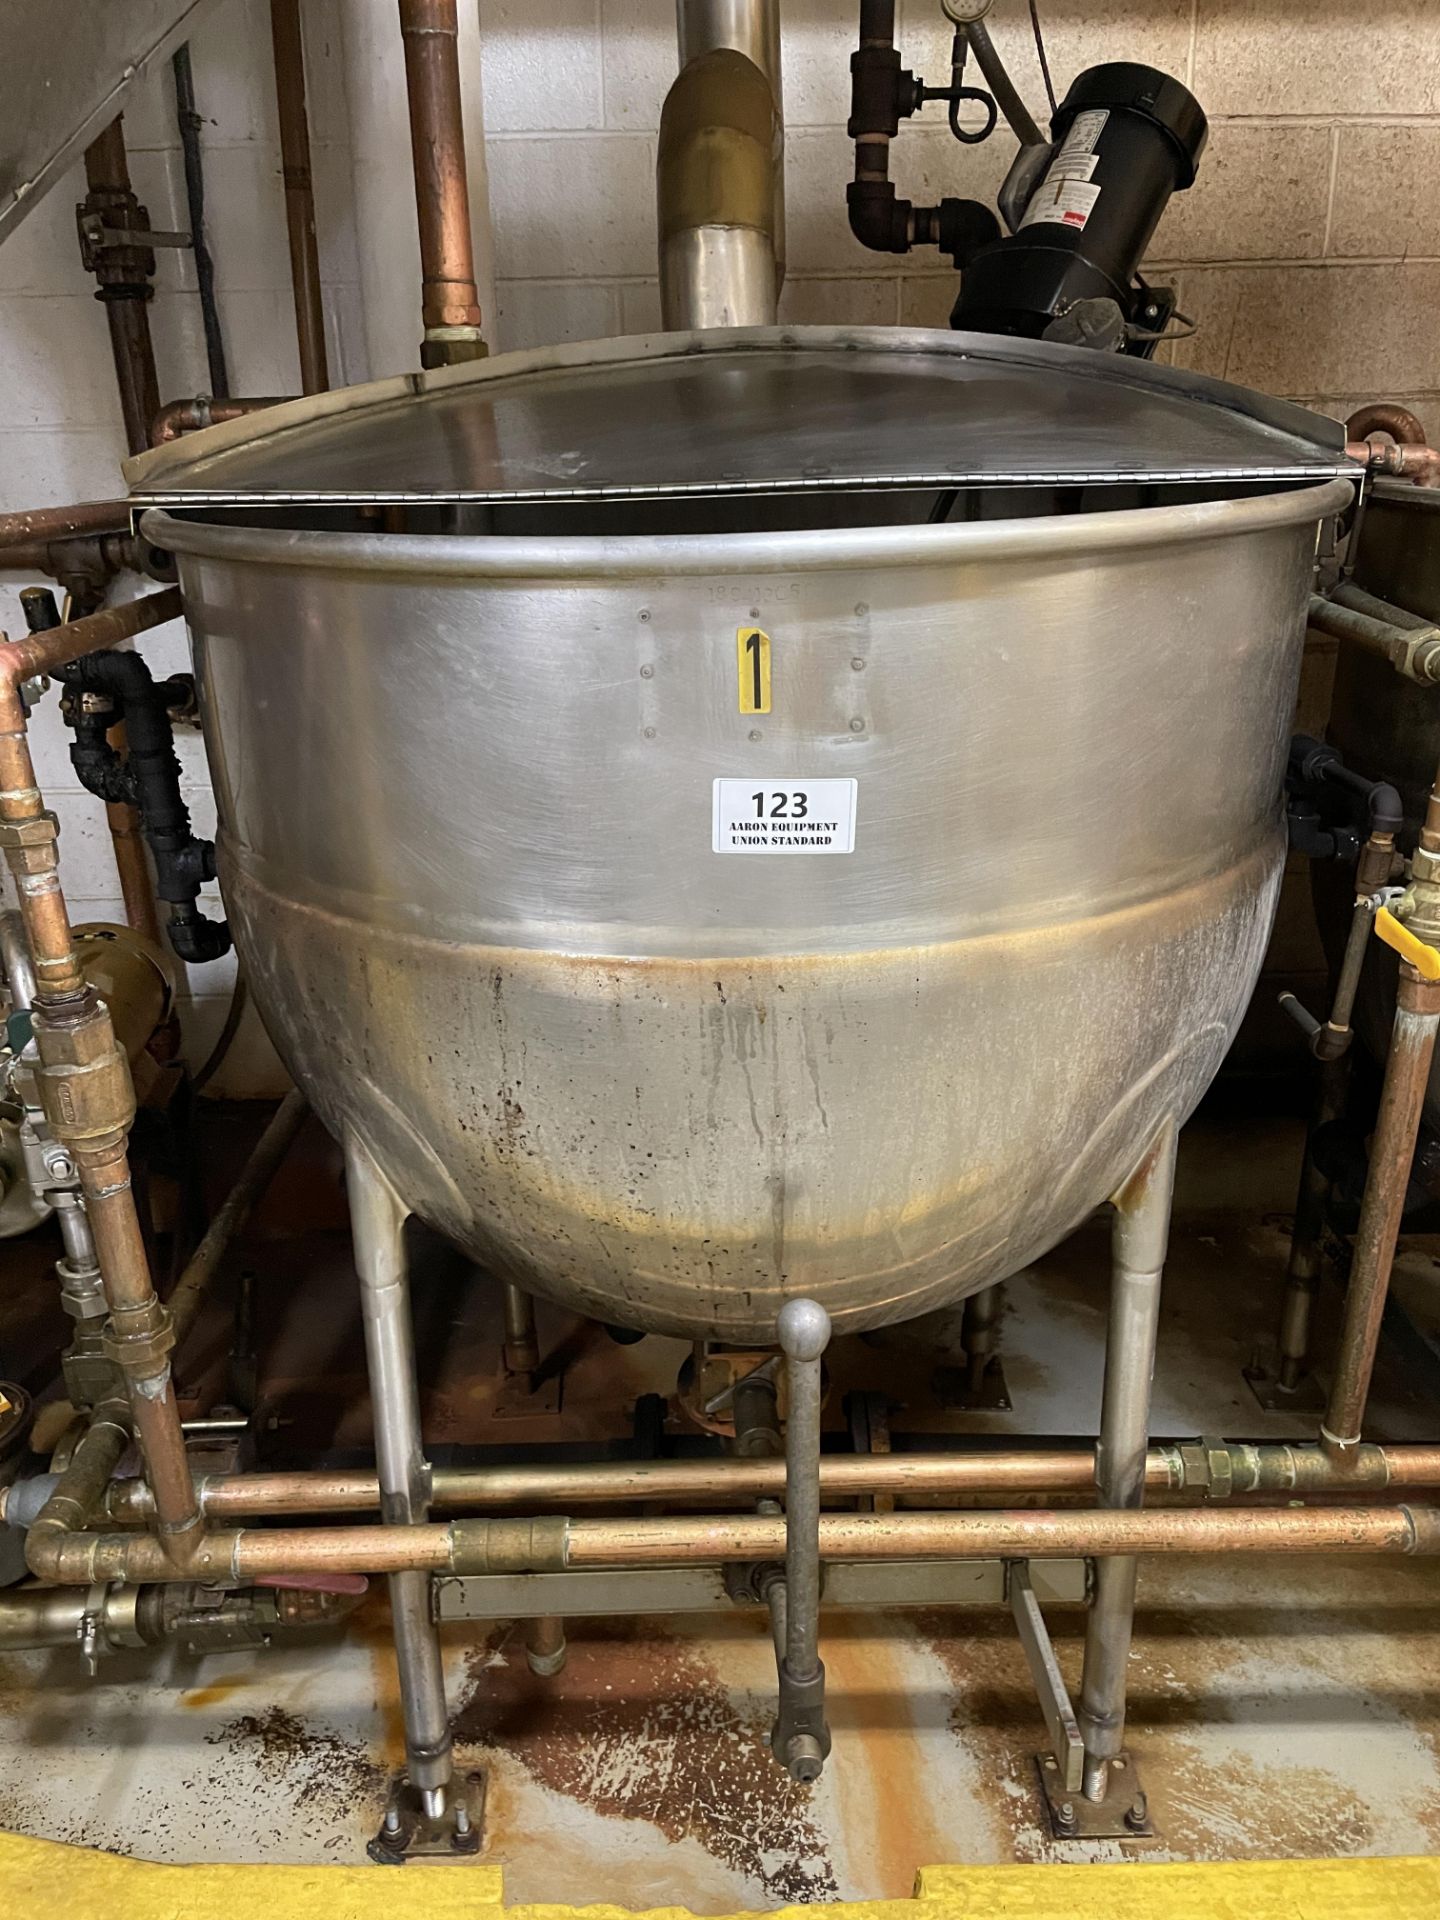 Asset 123 - 150 Gallon Stainless Steel jacketed Kettle, 43" diameter x 32" with Propellor type